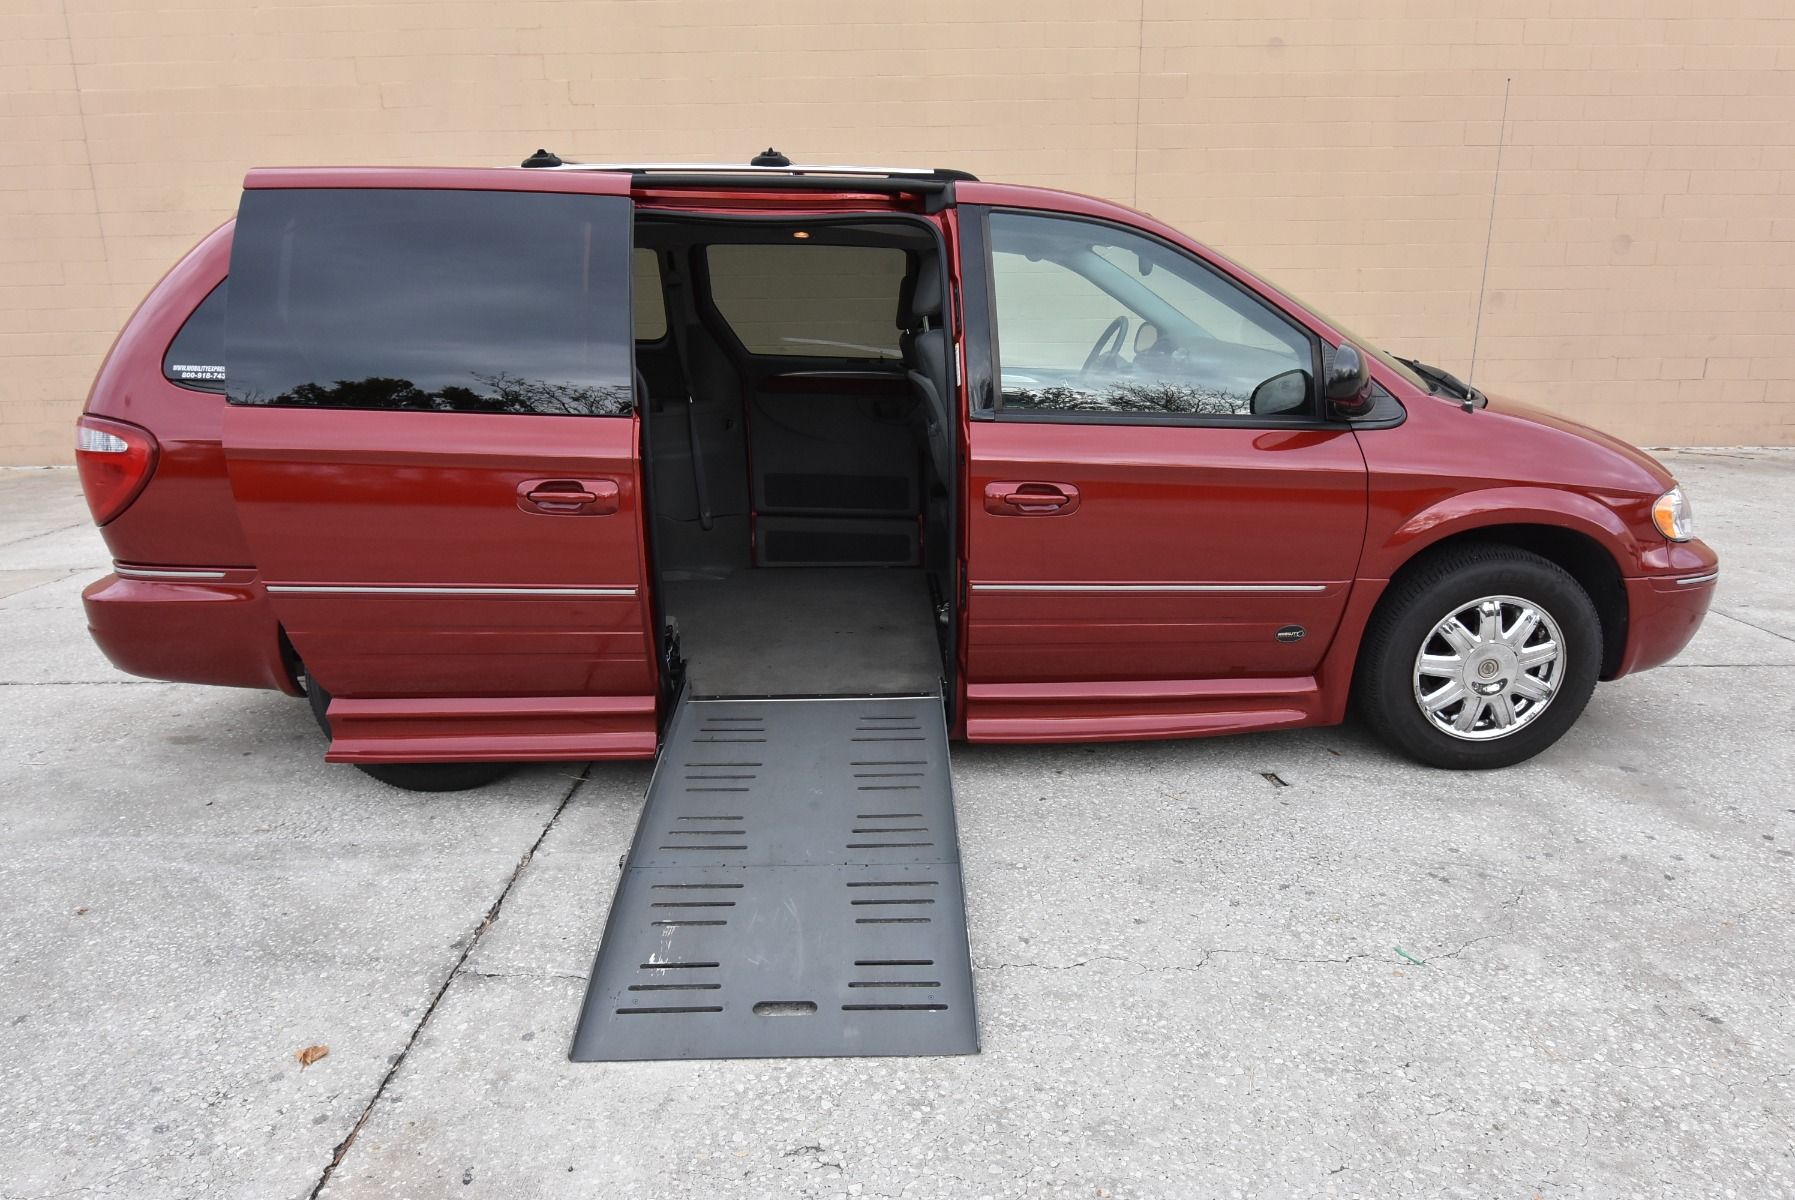 Red 2005 Chrysler Town & Country wheelchair van with ramp deployed from passenger sliding door.